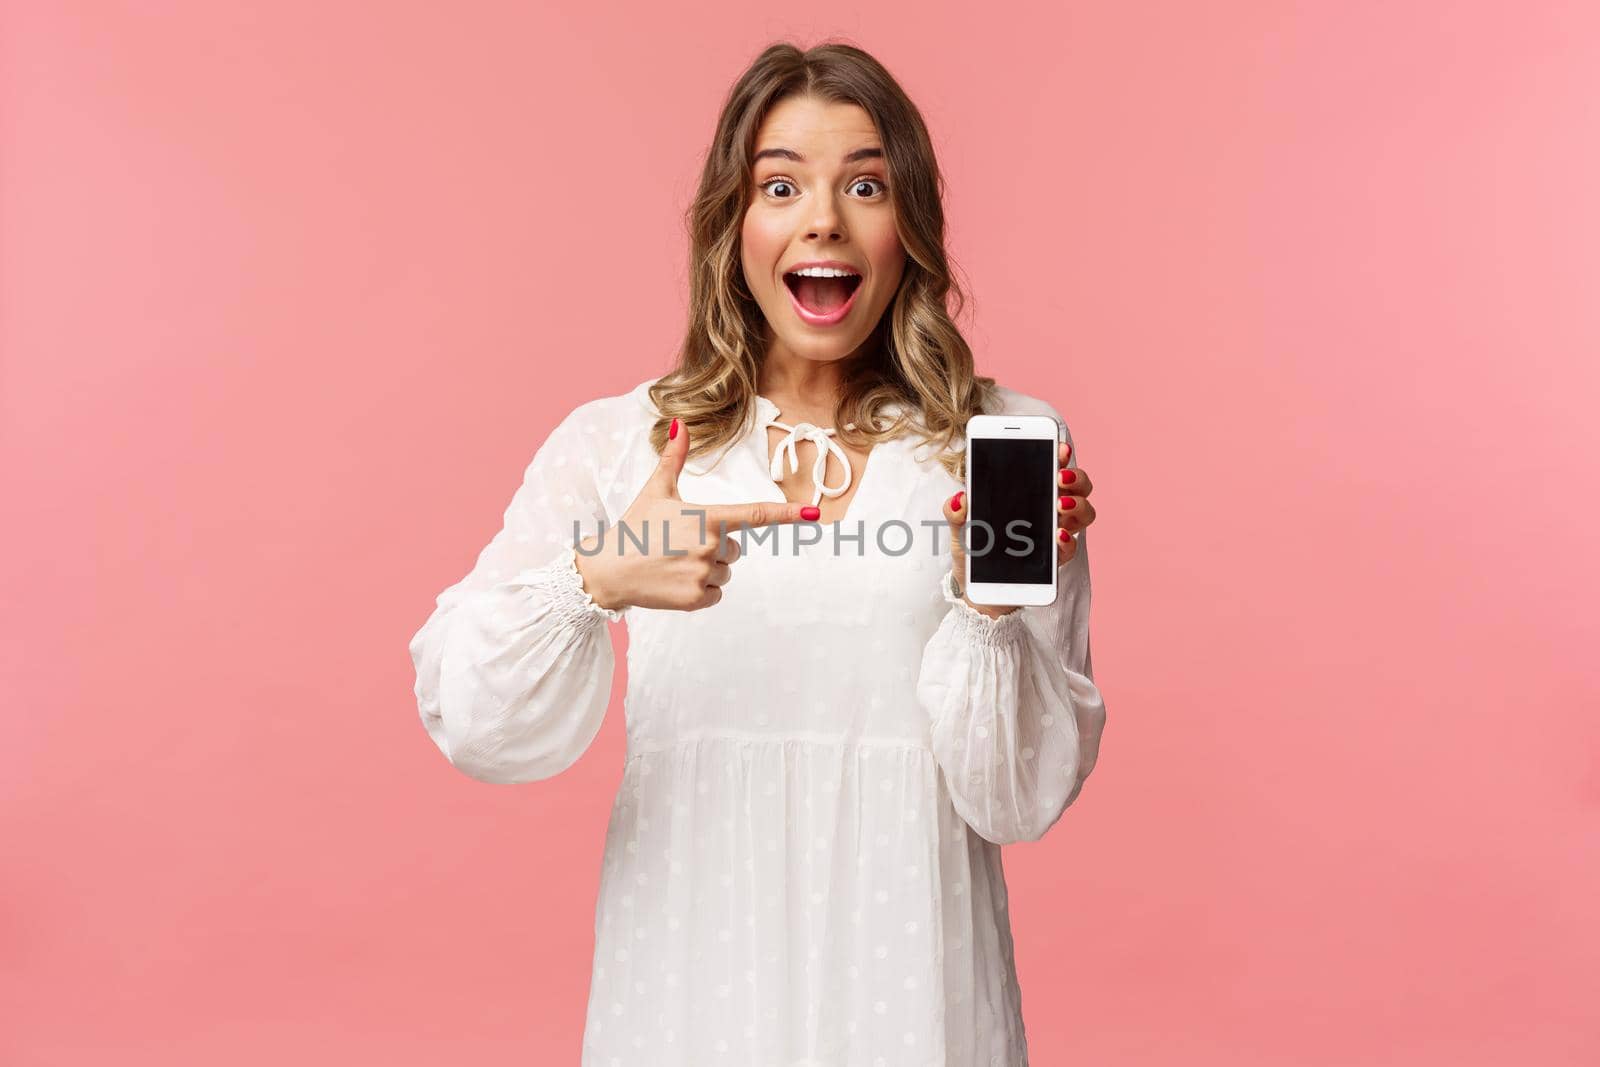 Portrait of impressed, excited young blond woman showing something awesome on display, pointing mobile phone screen and smiling astonished, brag with her recent match on dating app.